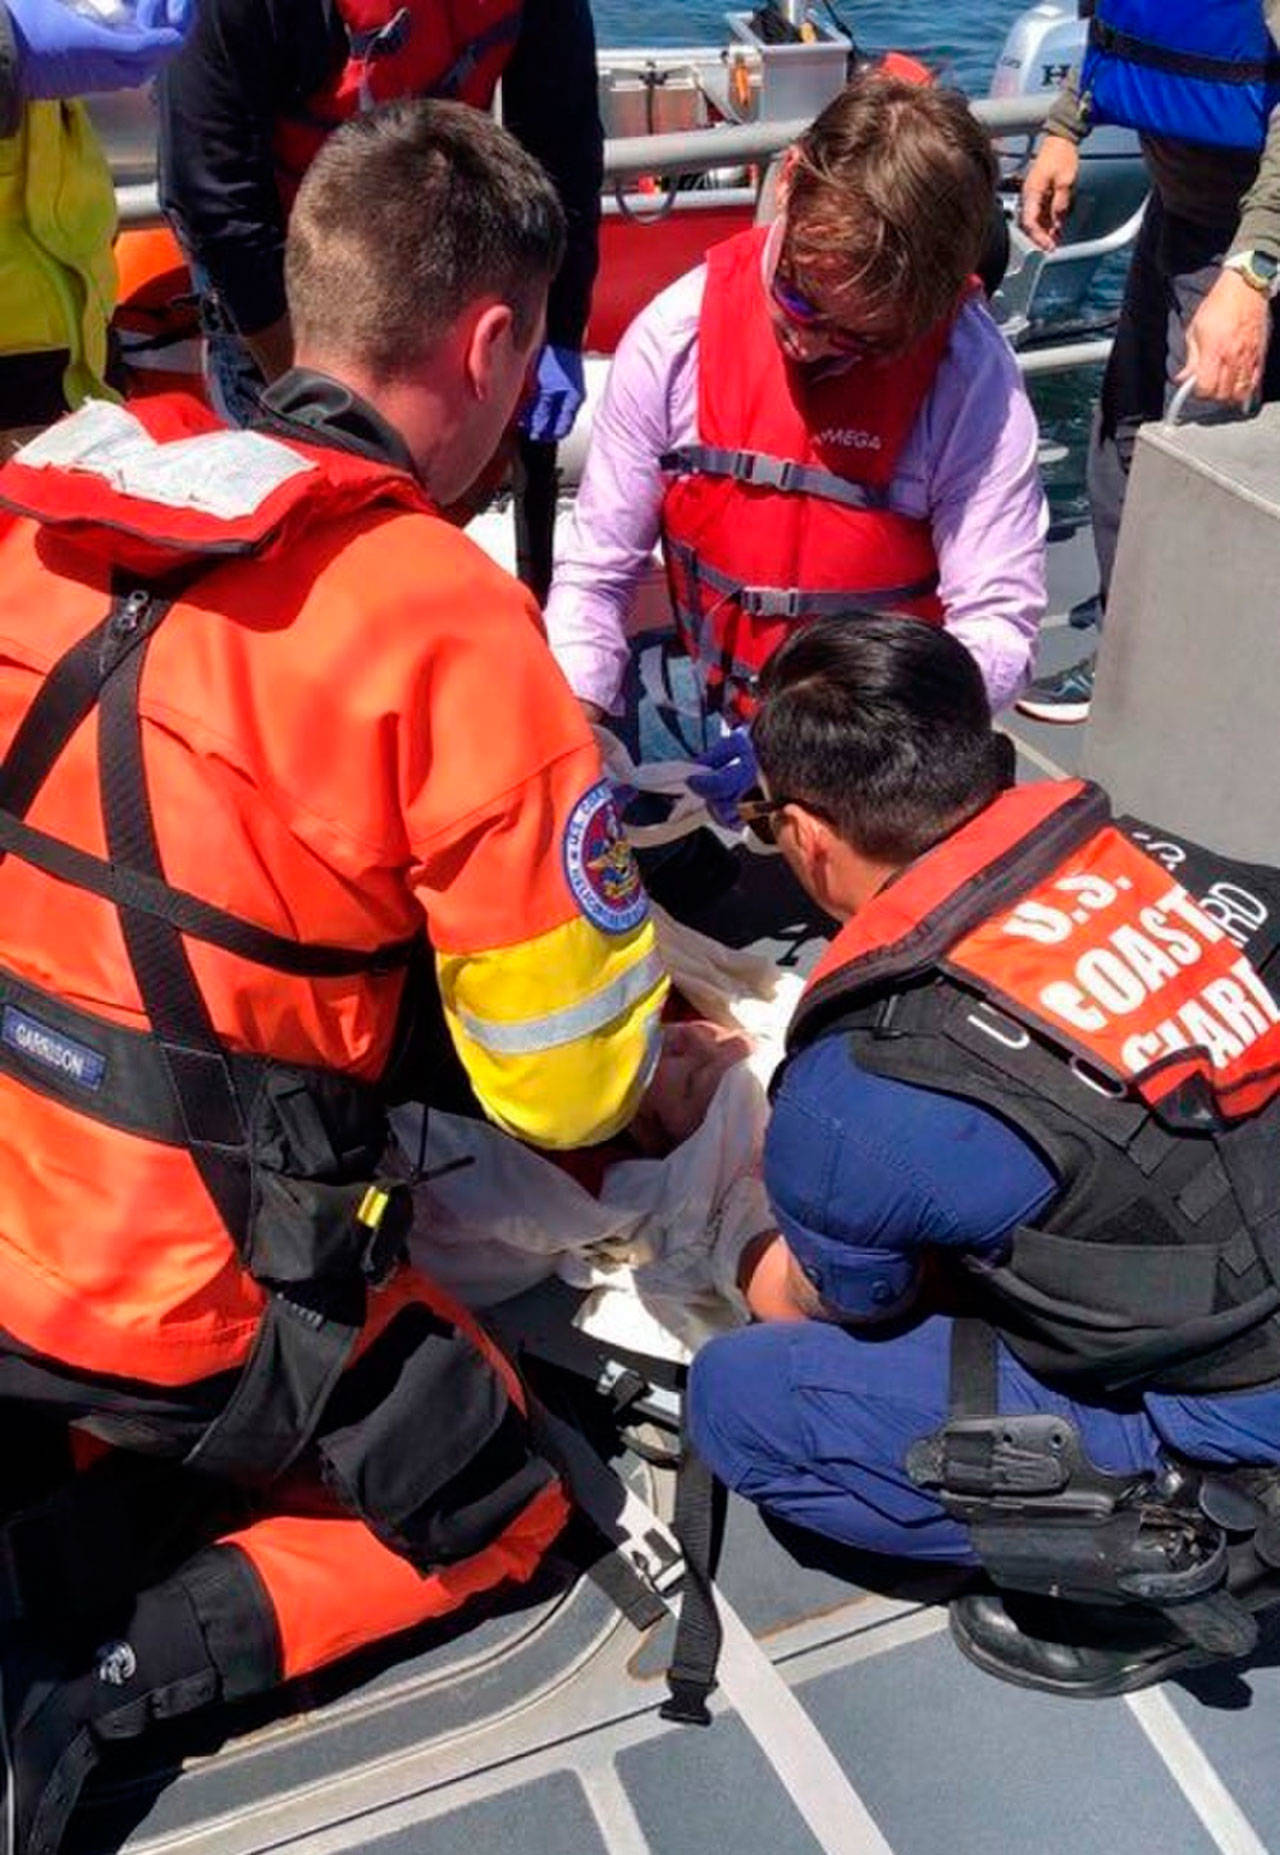 Contributed photo/Petty Officer 1st Class Levi Read, U.S. Coast Guard District 13                                An aviation survival technician and Petty Officer 3rd Class Jordan Harlacher assist with medical care given to a 70-year-old woman injured during a sailing accident near Sucia Island.